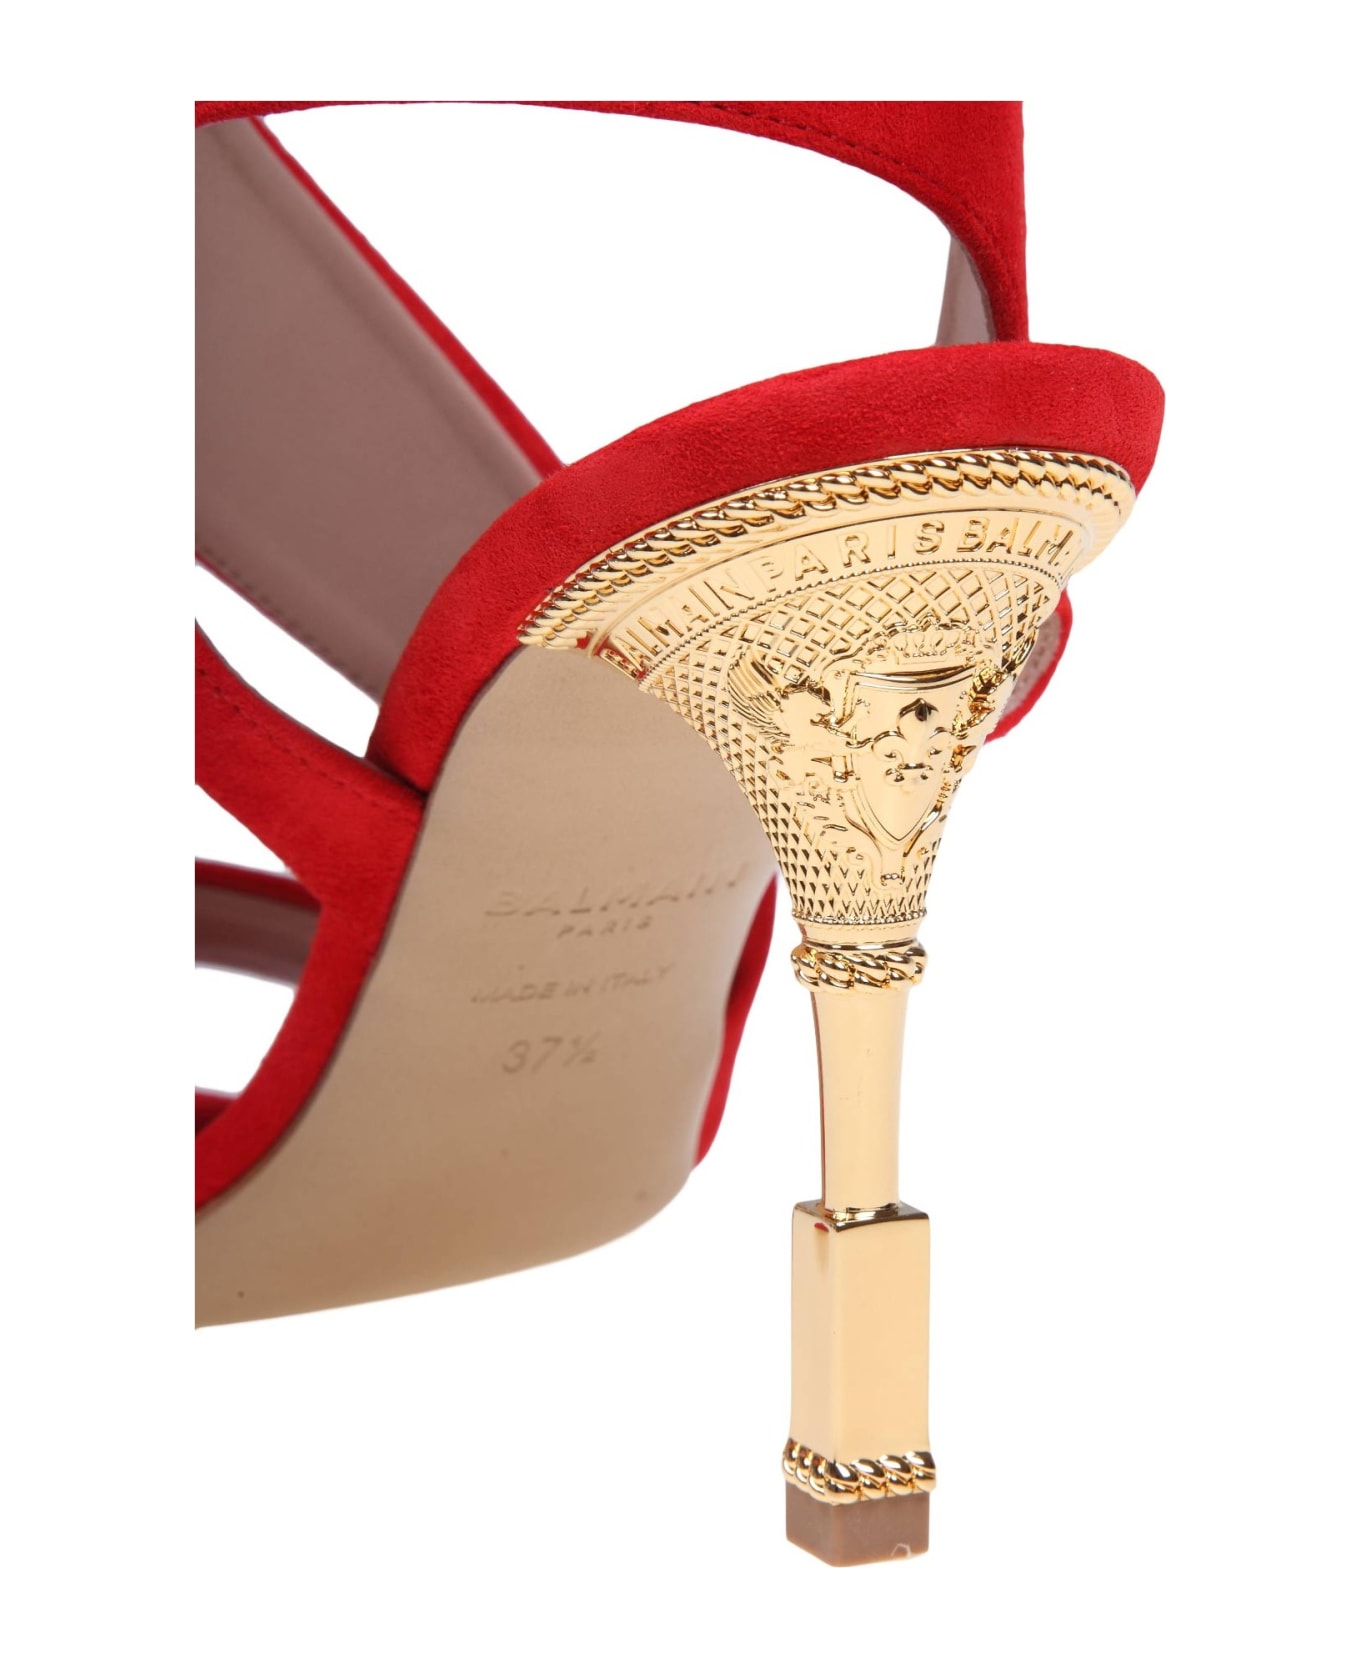 Balmain Red Suede Coin Sandal - Rouge